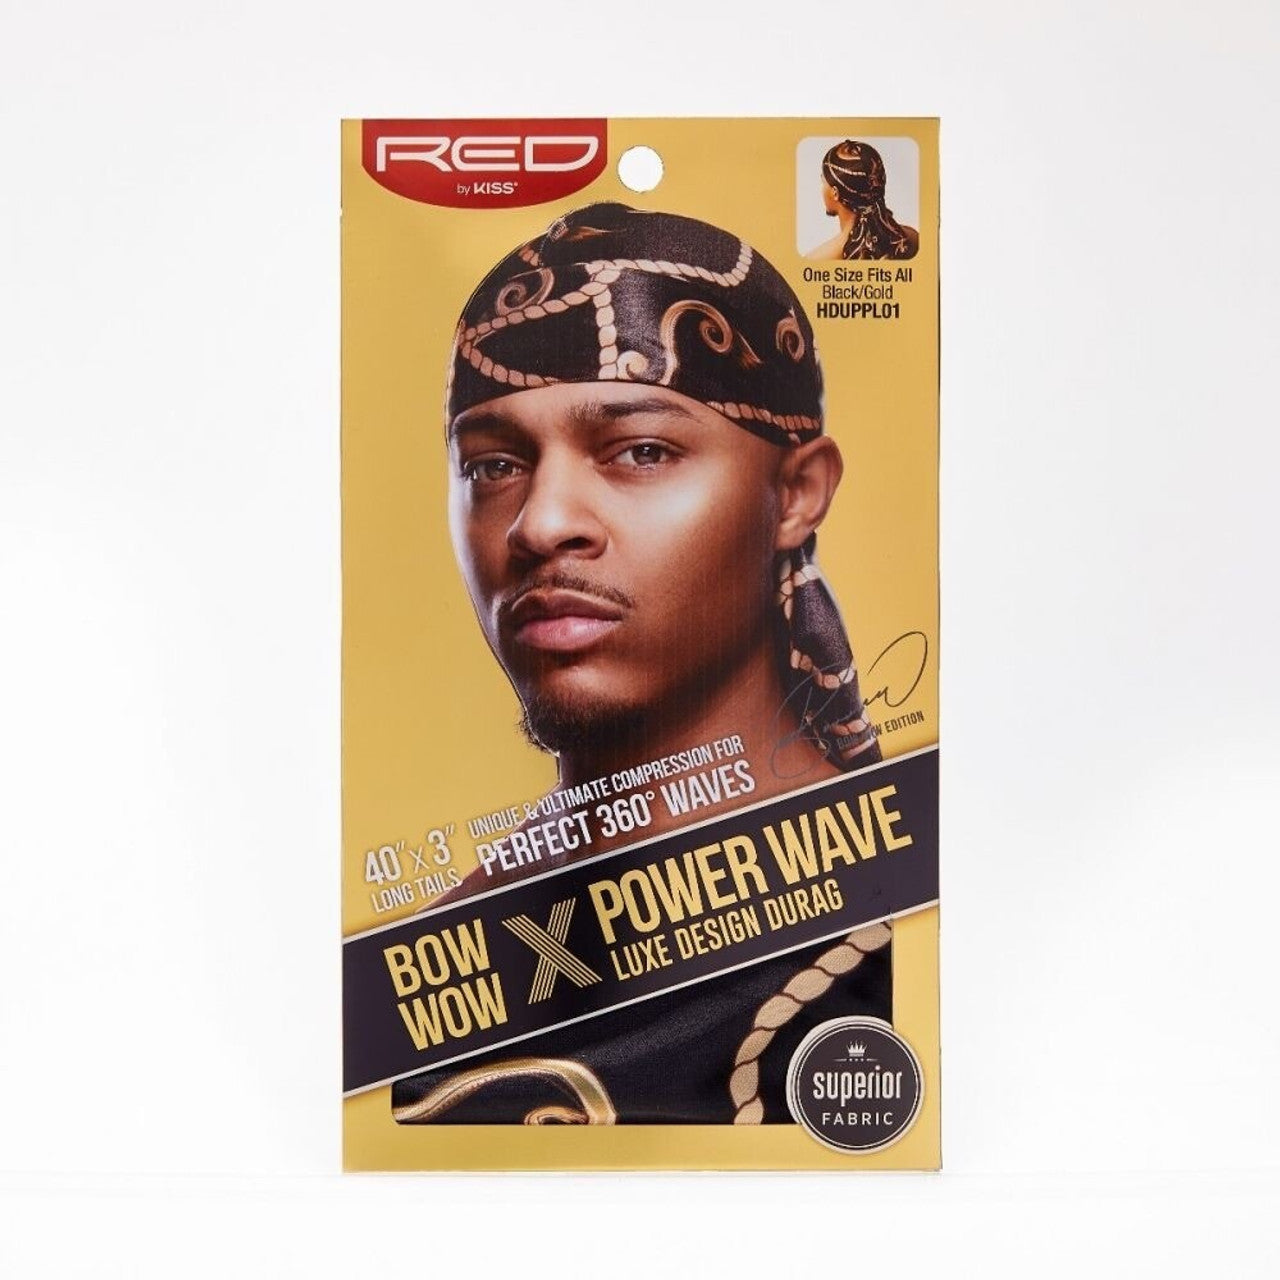 Red by Kiss Bow Wow X Power Wave Luxe Design Durag - Black and Gold - #HDUPPL01